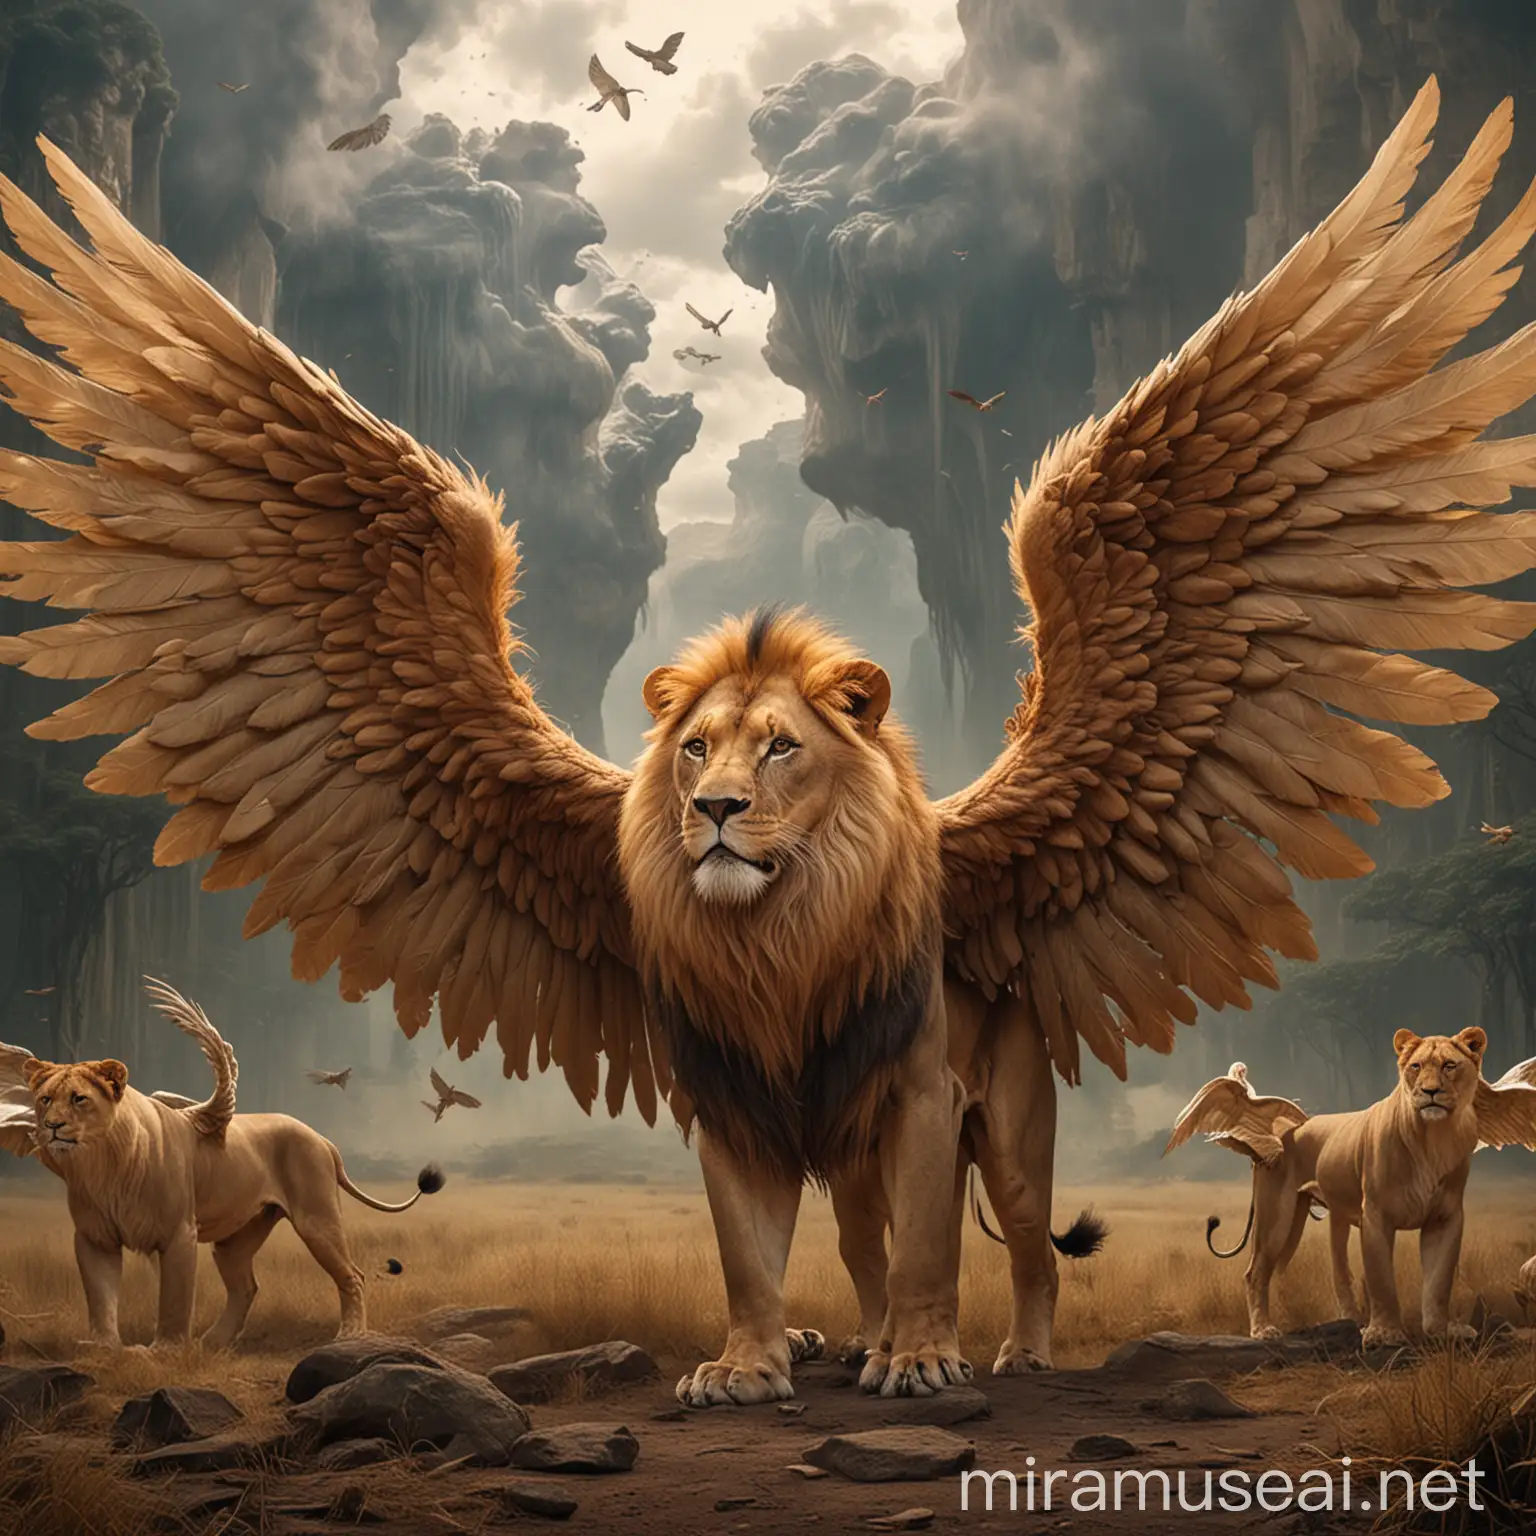 Majestic Lions with Gigantic Wings in Enchanted Forest